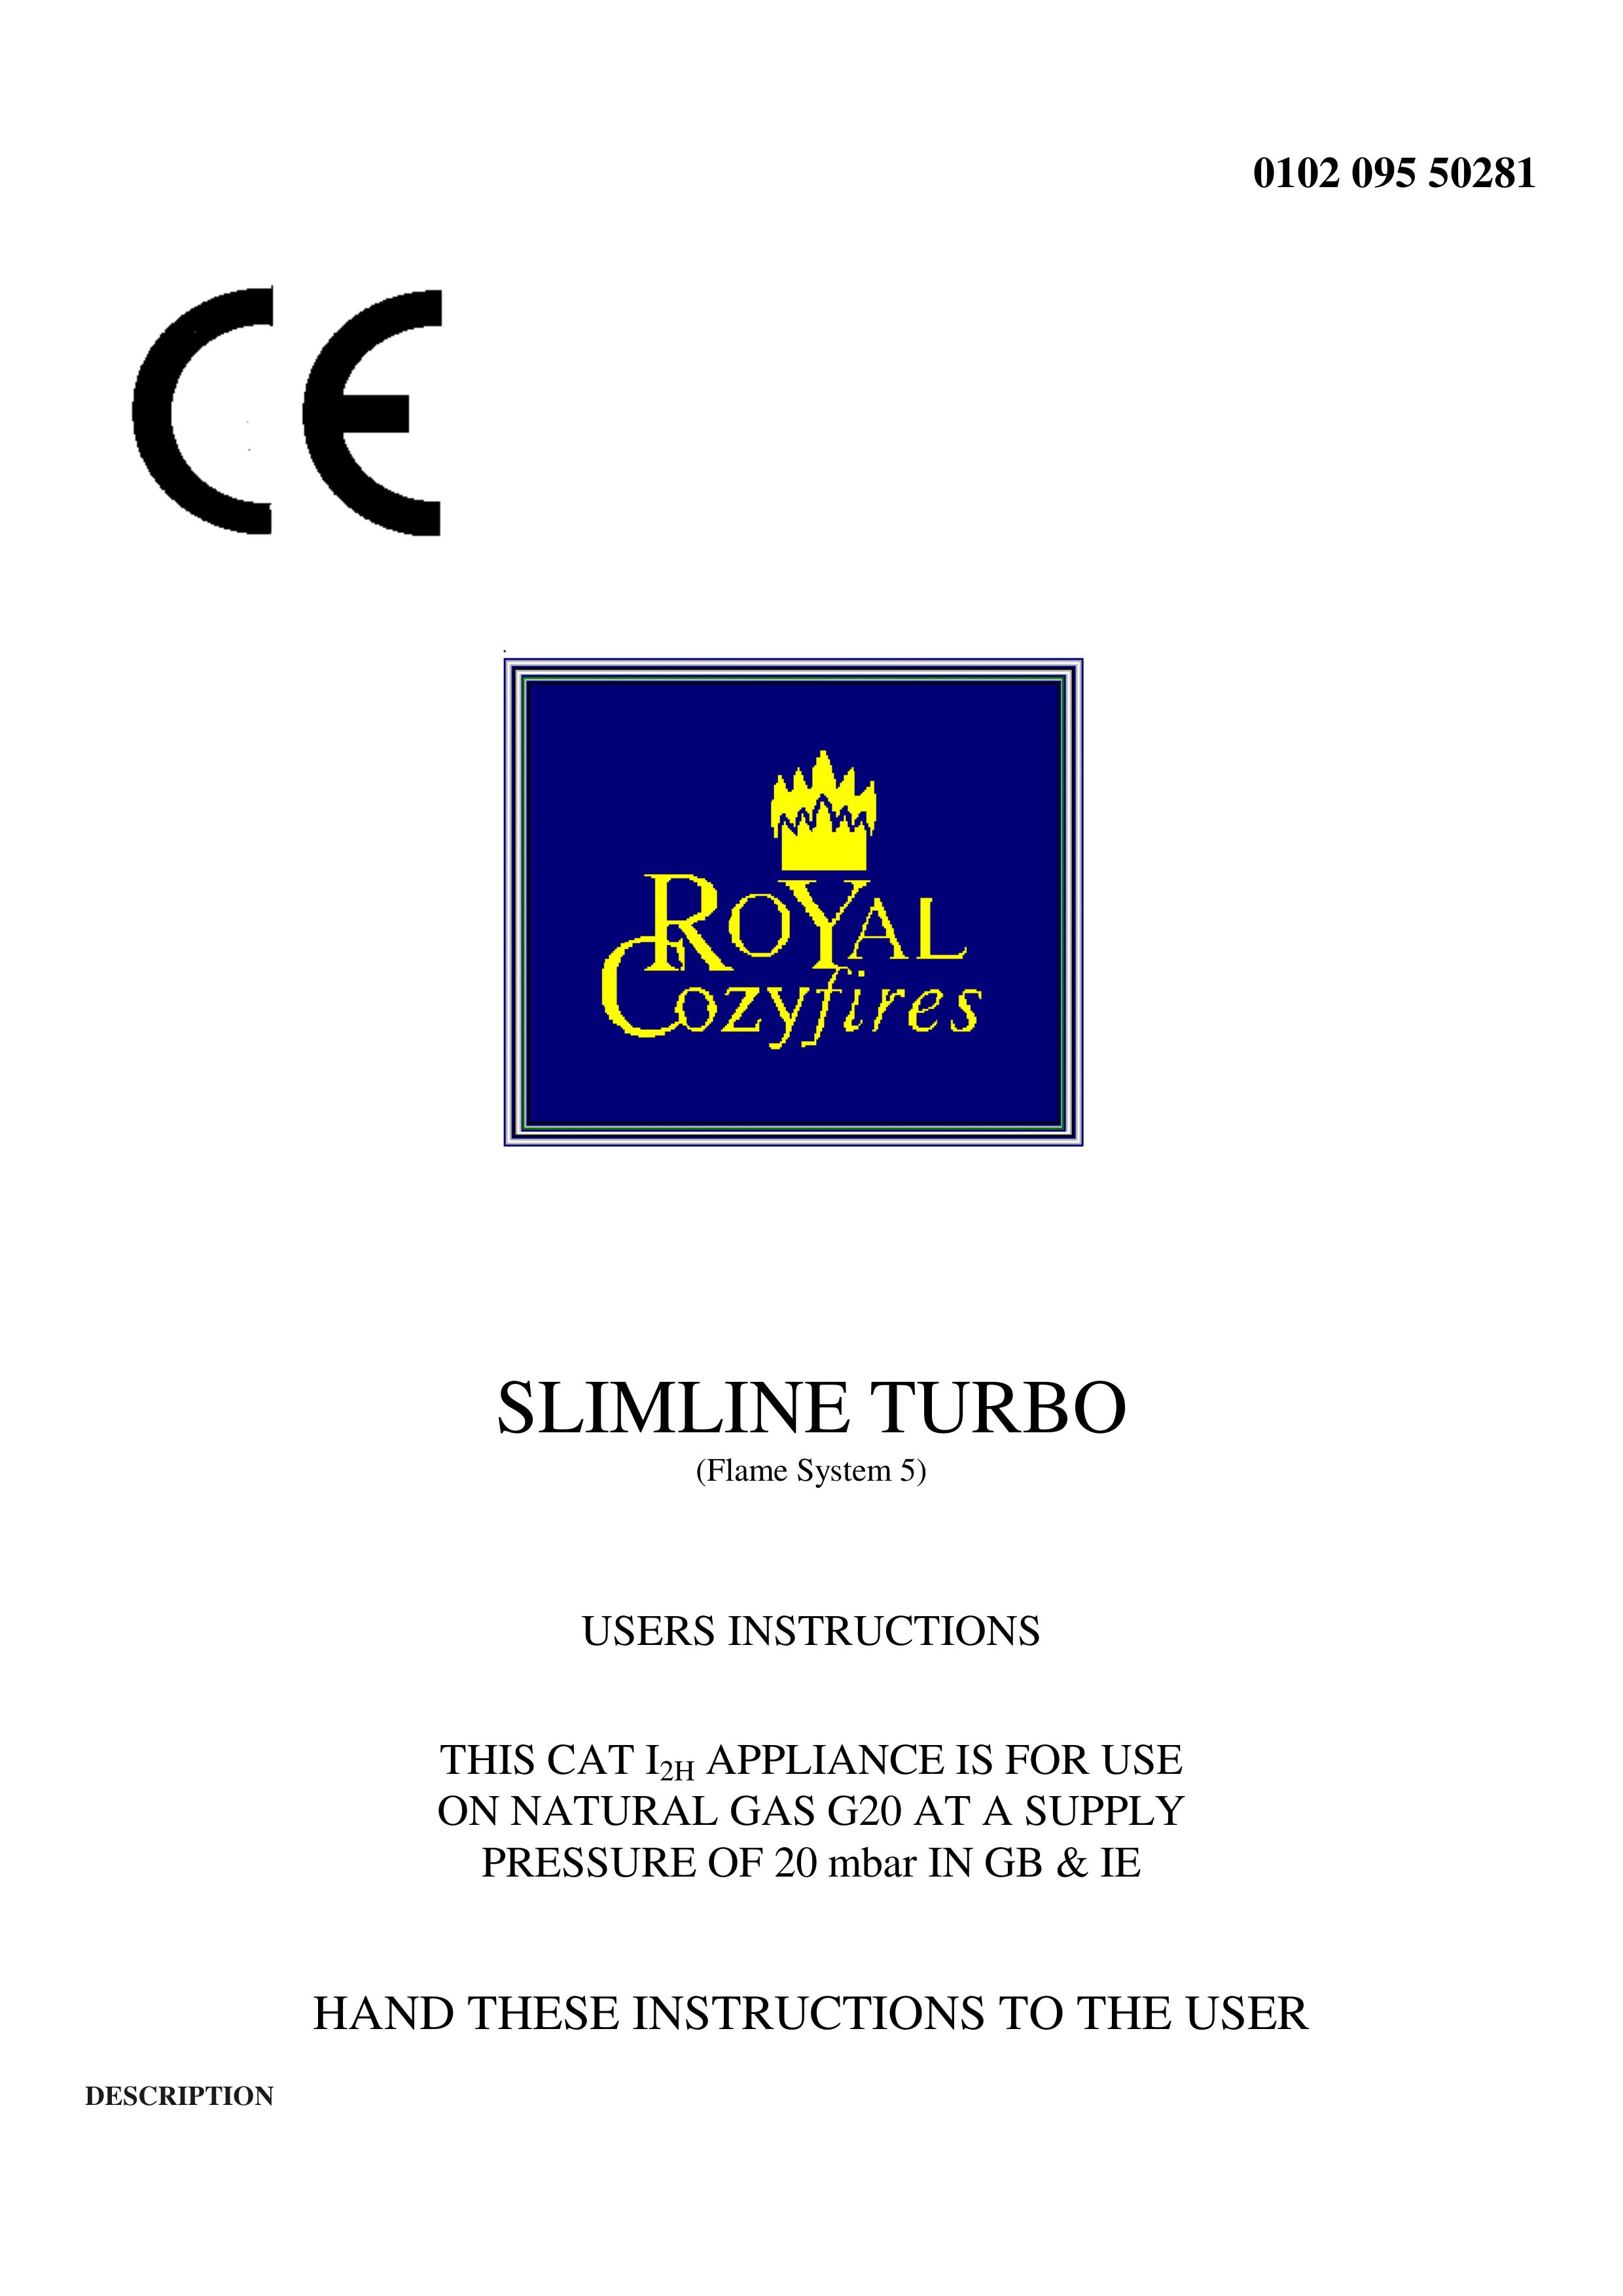 Royal Consumer Information Products U19023 Outdoor Fireplace User Manual